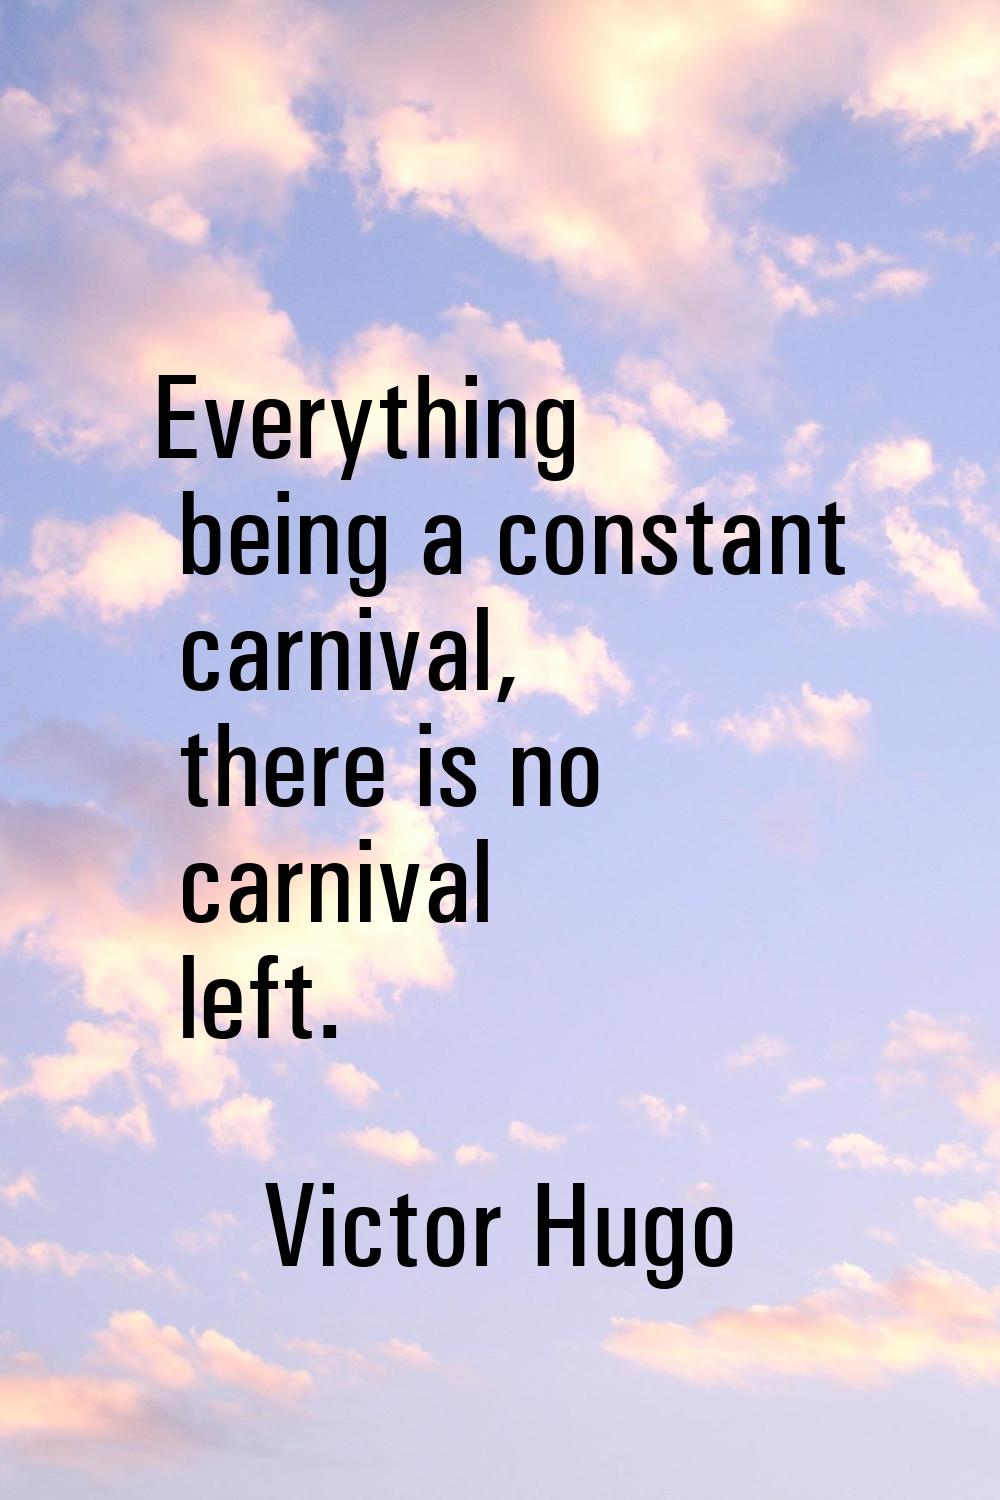 Everything being a constant carnival, there is no carnival left.